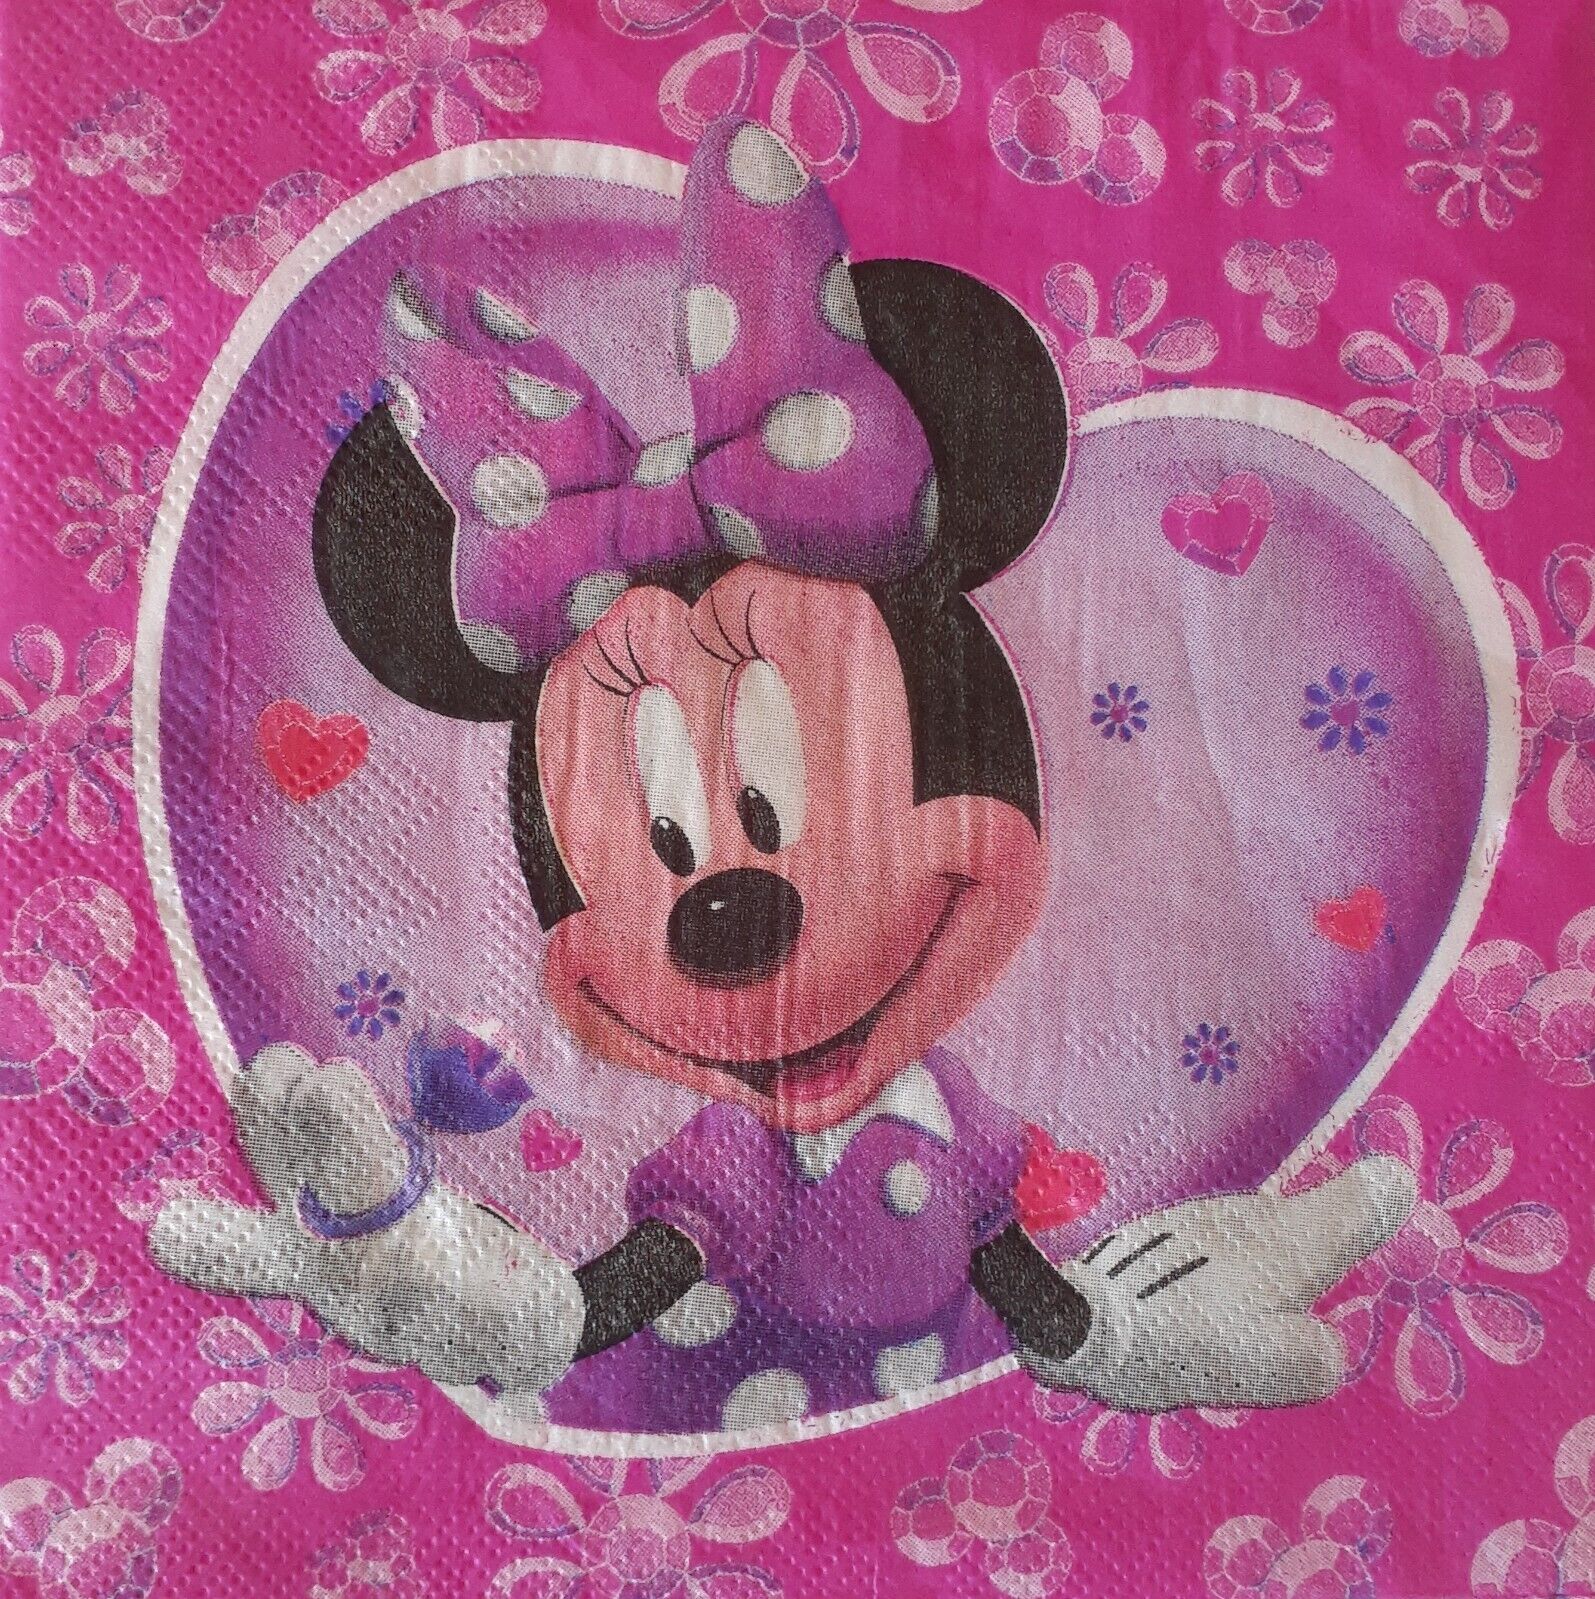 2 individual Paper Decoupage NAPKINS - MINNIE GIRLY PINK MOUSE PRINCESS